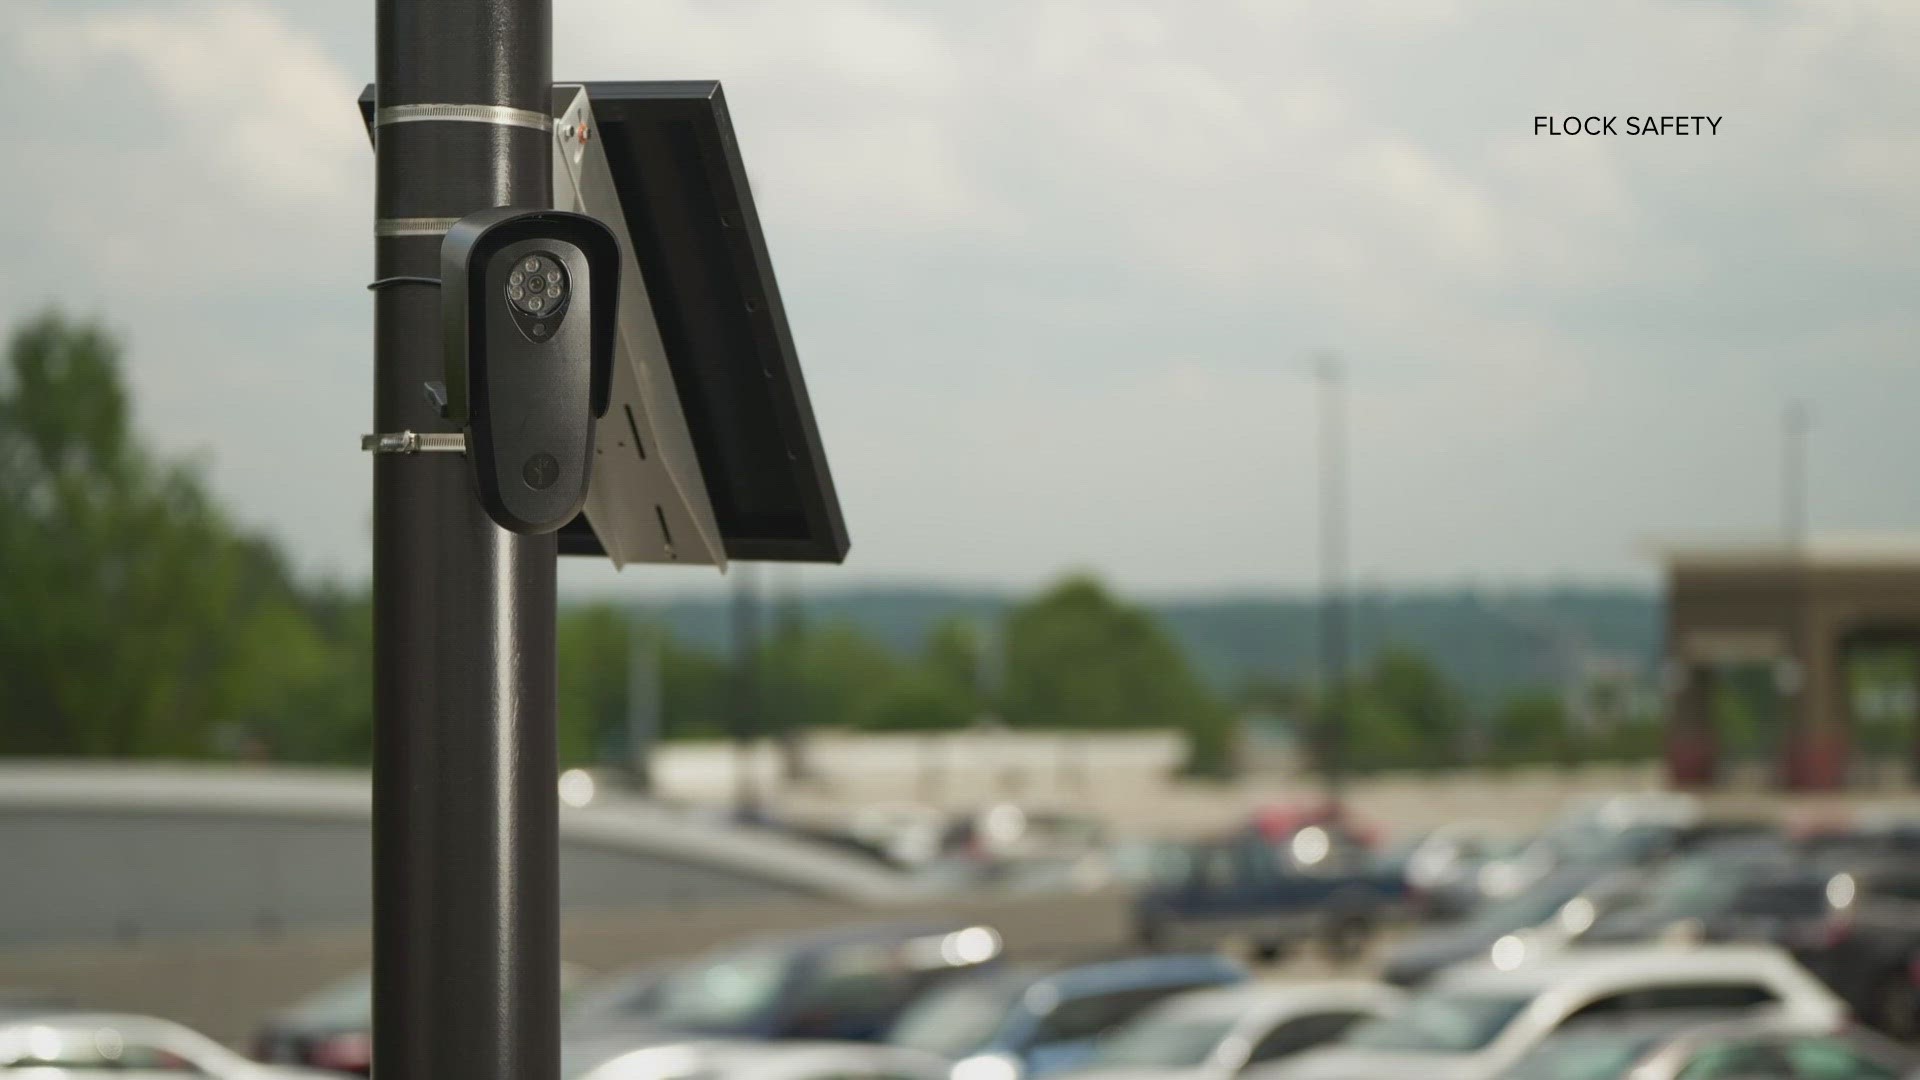 The CU Boulder Police Department is using a new kind of license plate reader on campus to help investigate crimes.